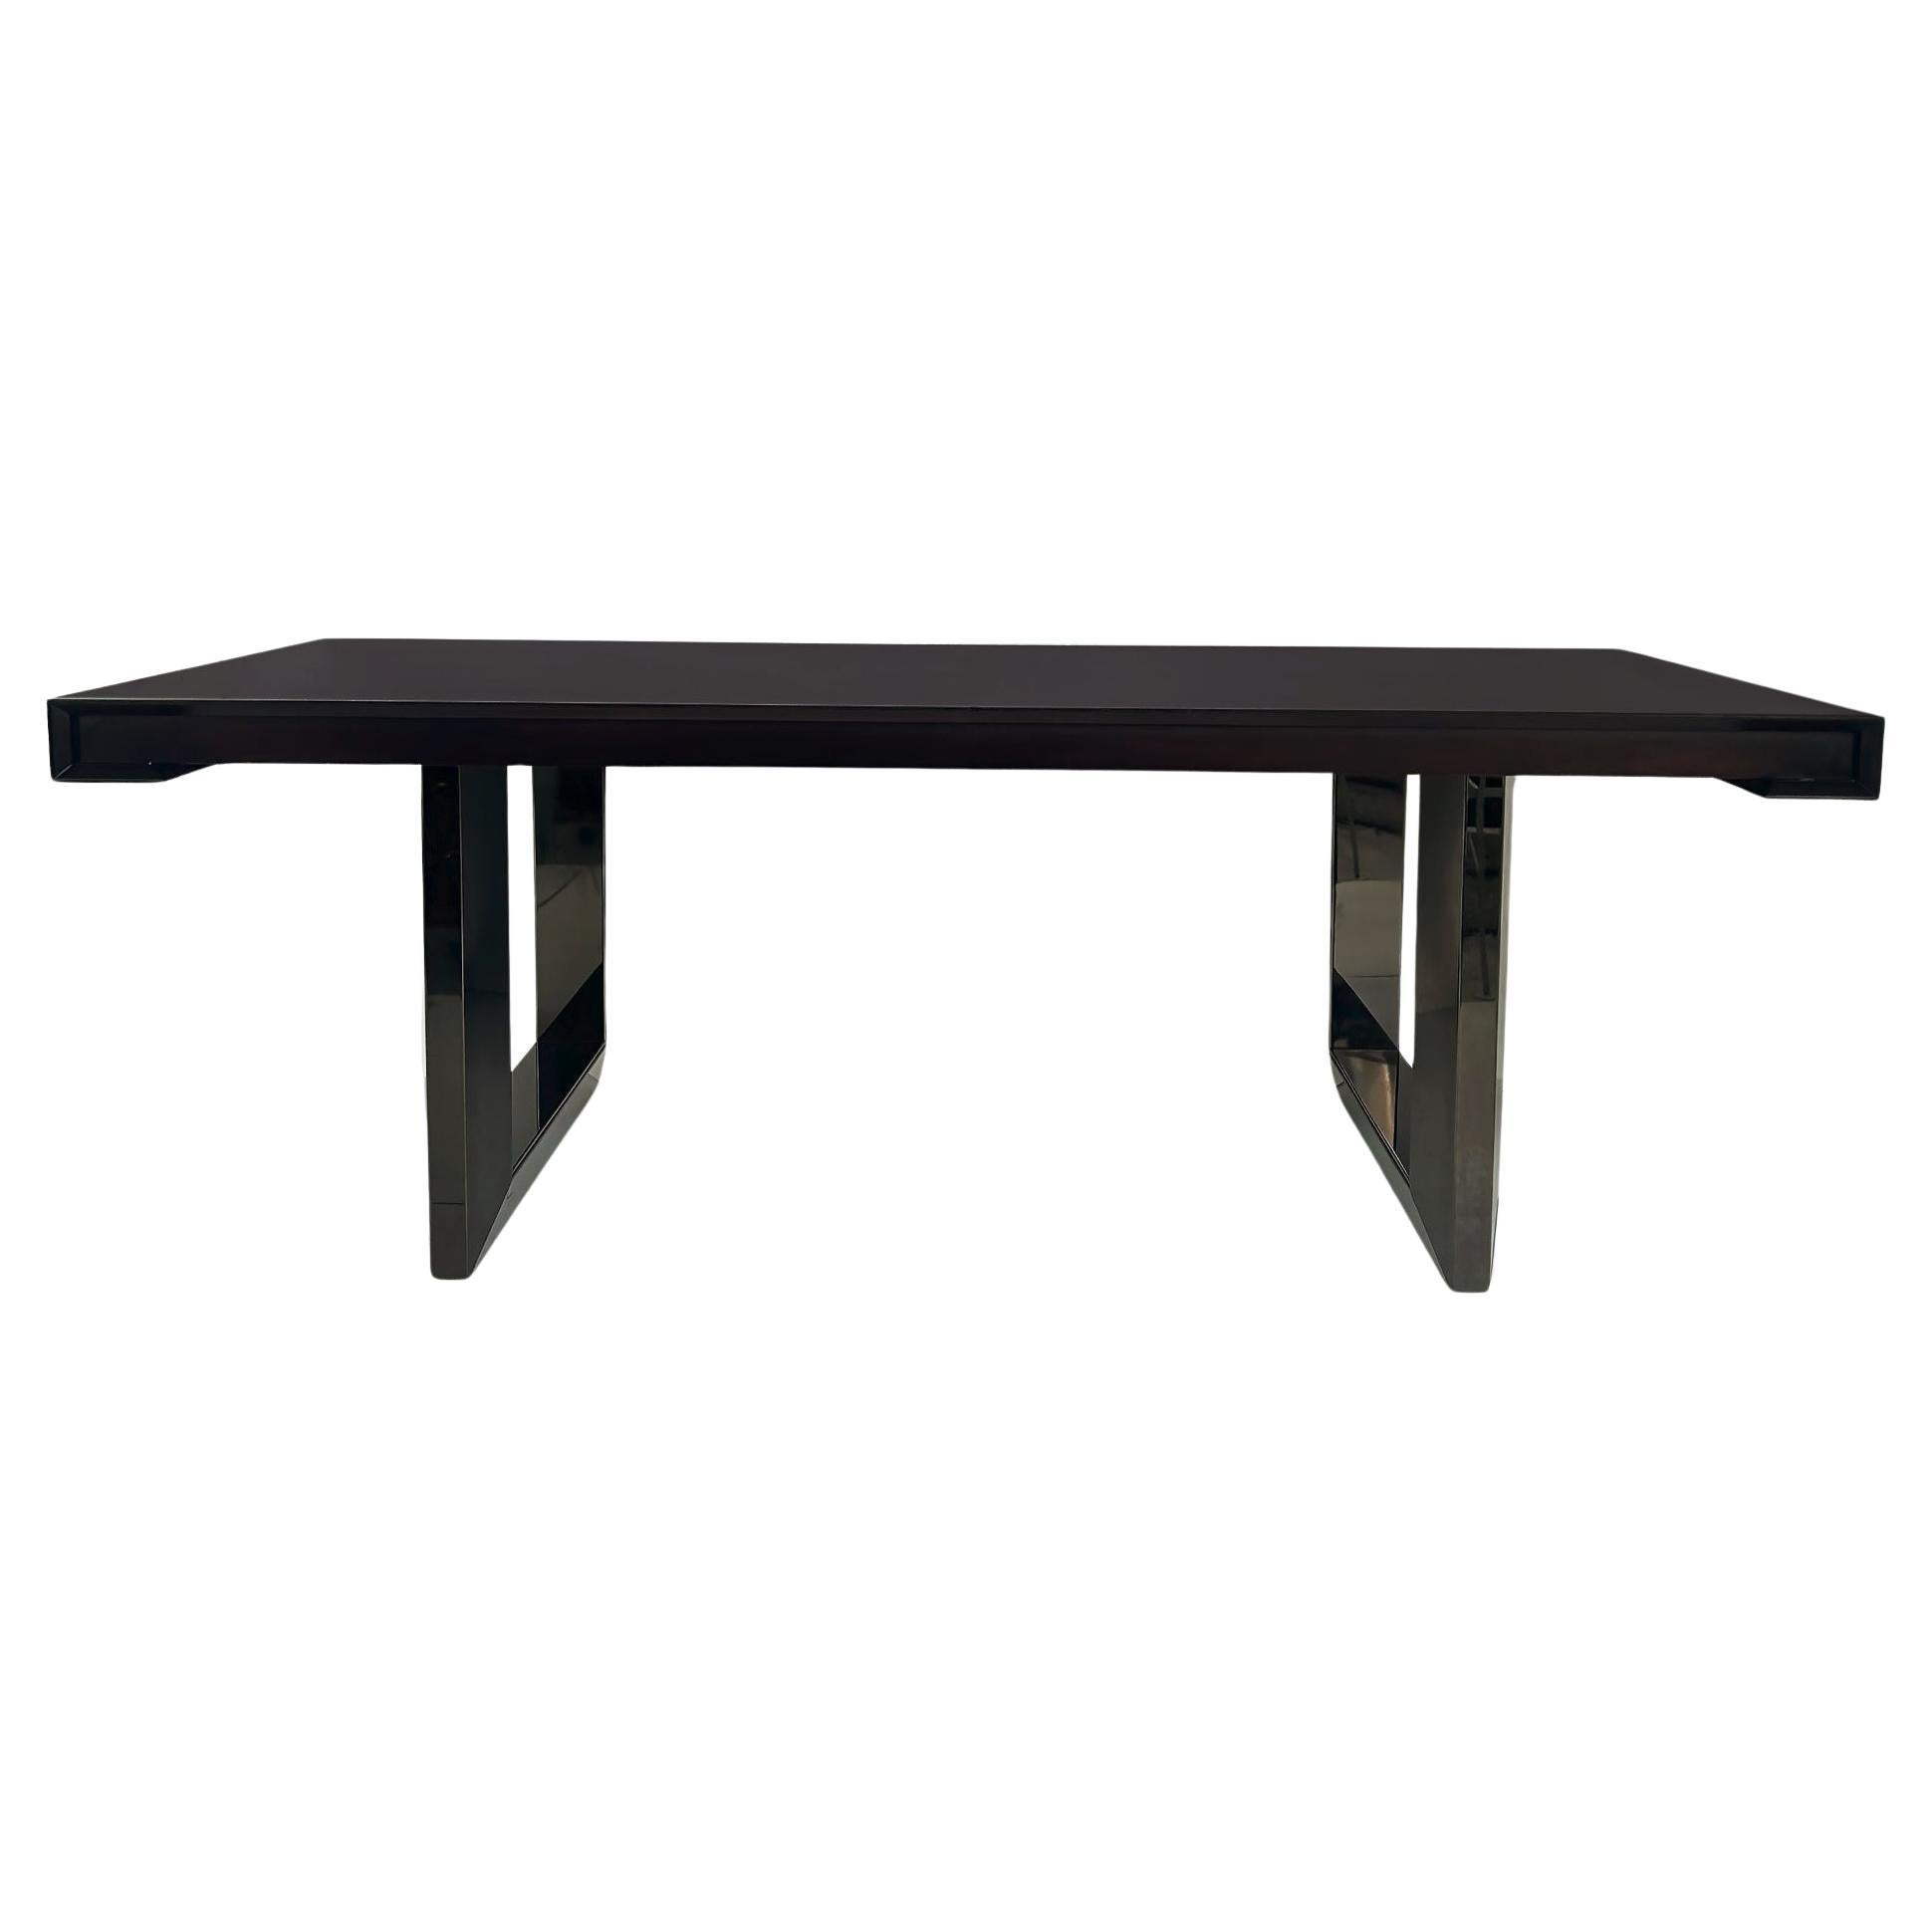 Umberto Asnago Mobilidea Dining Table Palisander Wood and Gun Metal Trim, Italy For Sale